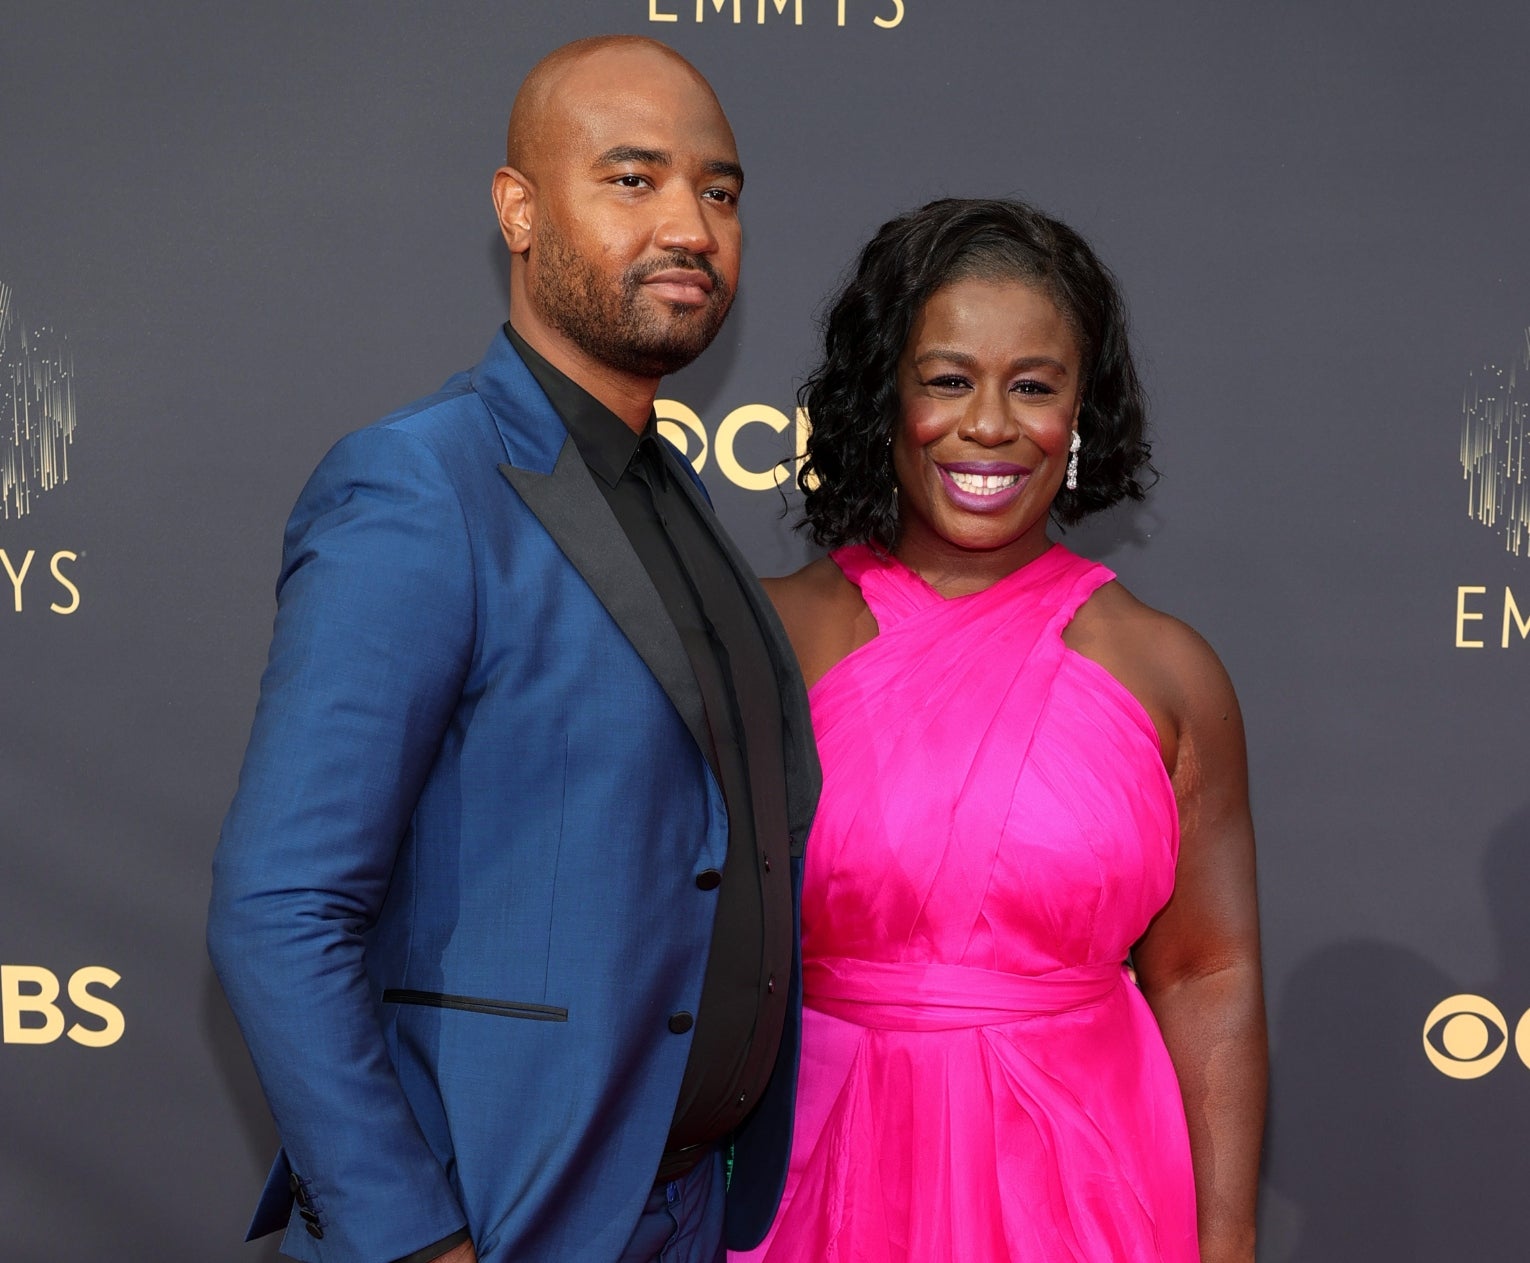 These Couples Made The 2021 Emmys Date Night